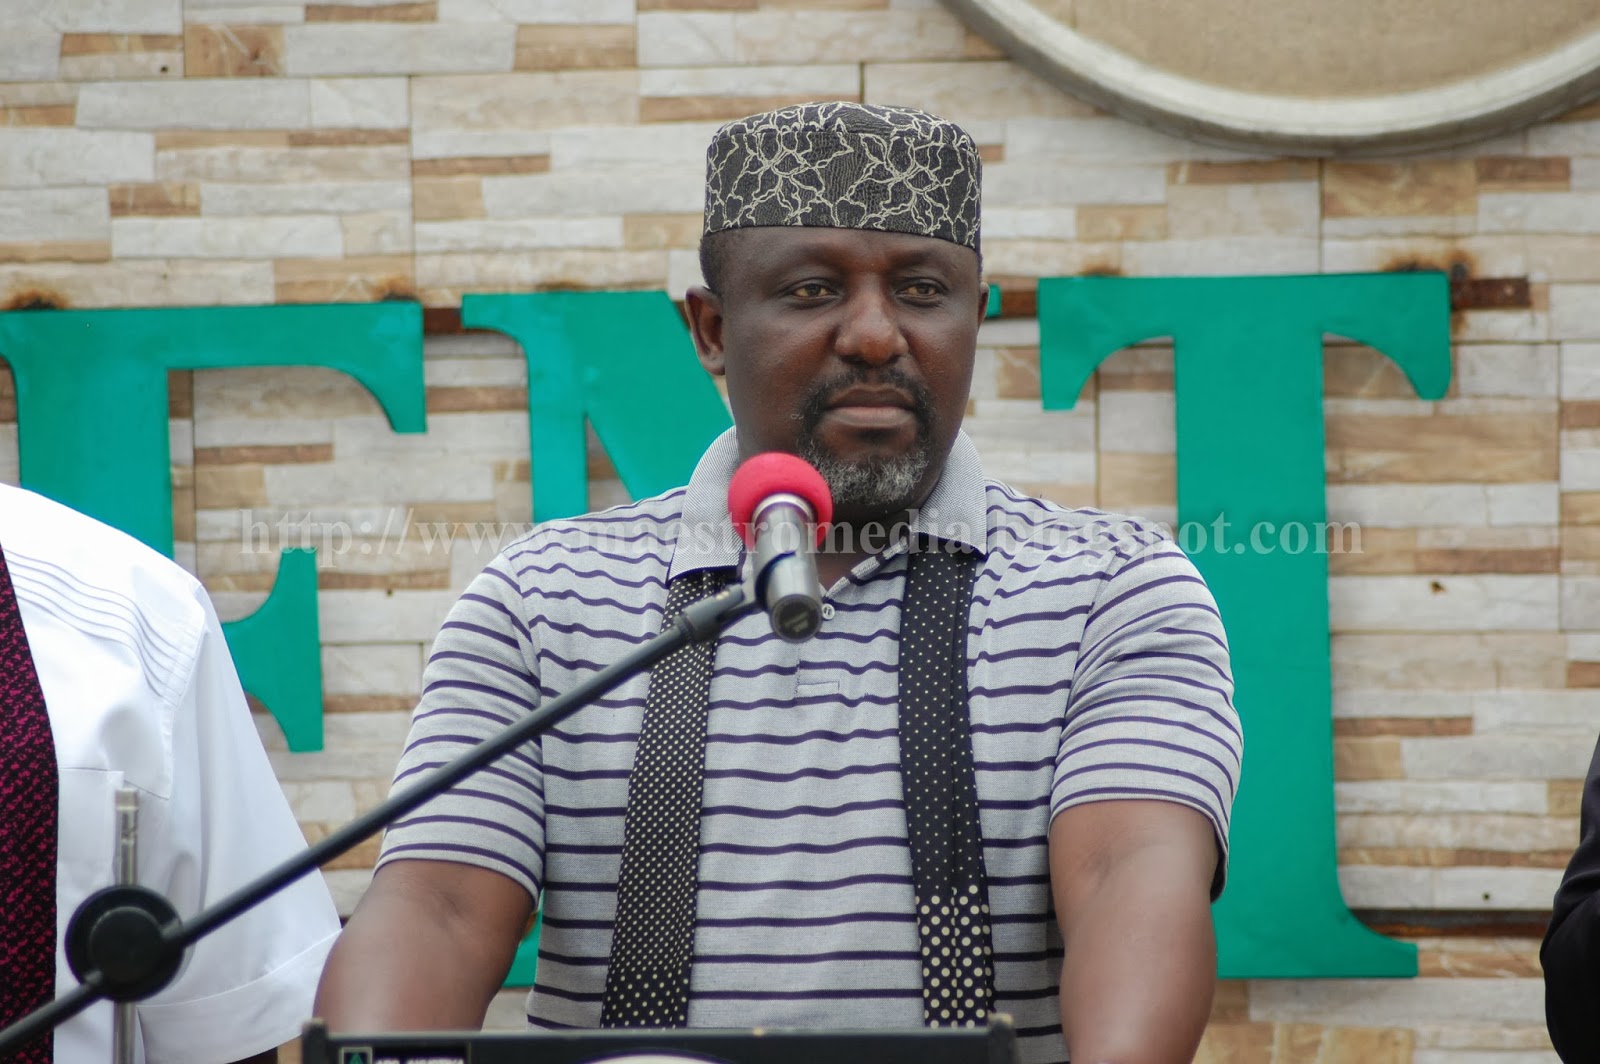 If You Want Me to Stand For Re-Election, You Must Pay 100 Naira Each – Gov. Rochas Okorocha